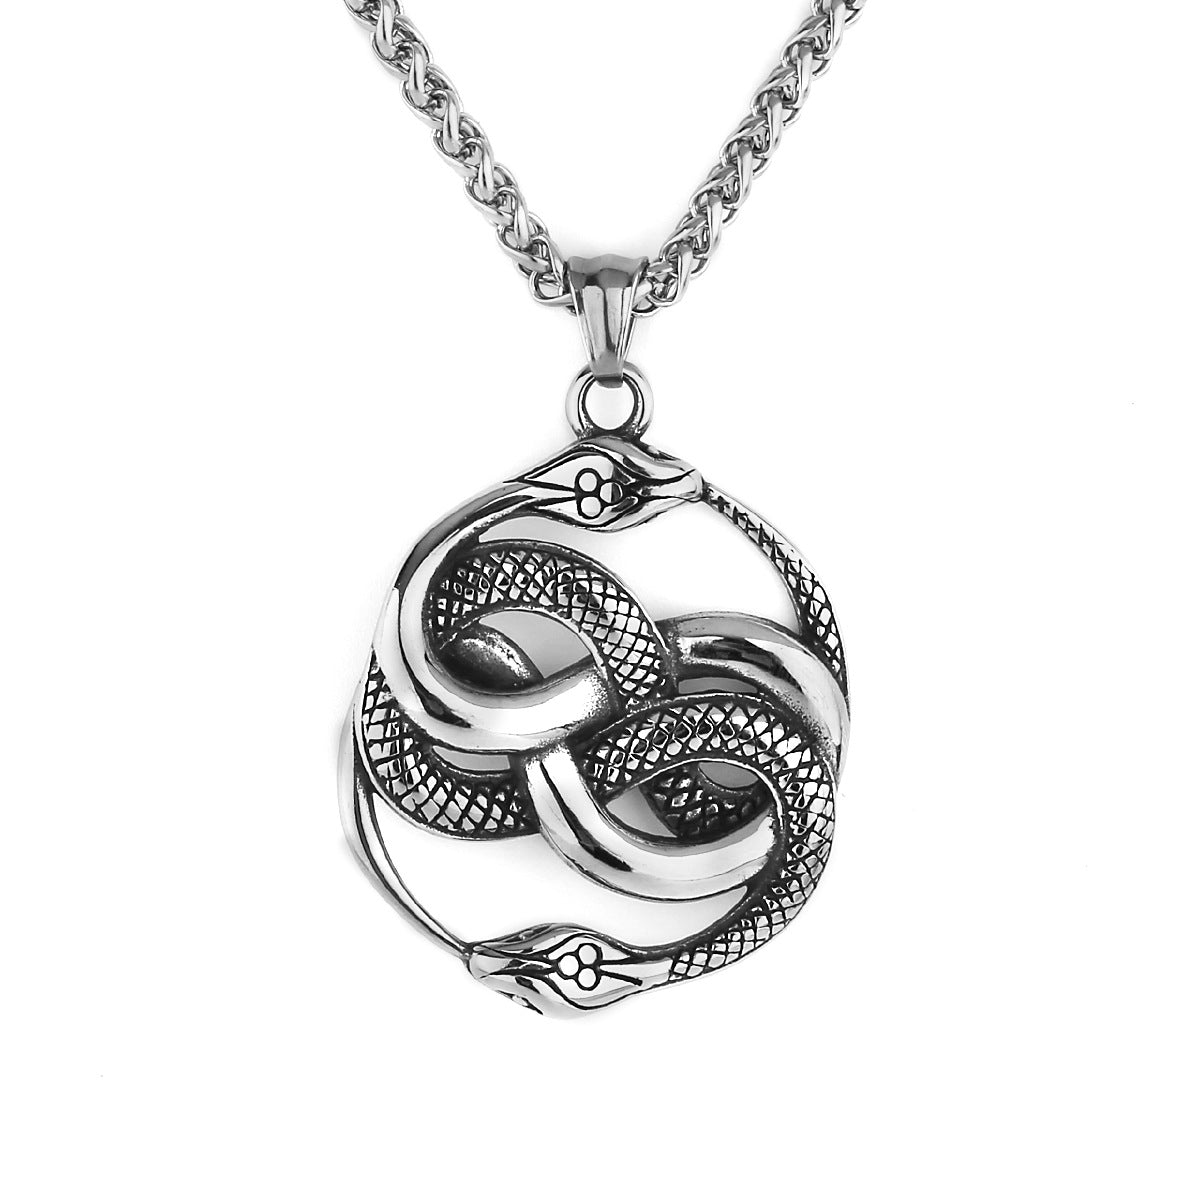 Mens Fashion Double Snake Staff Pendant Necklace